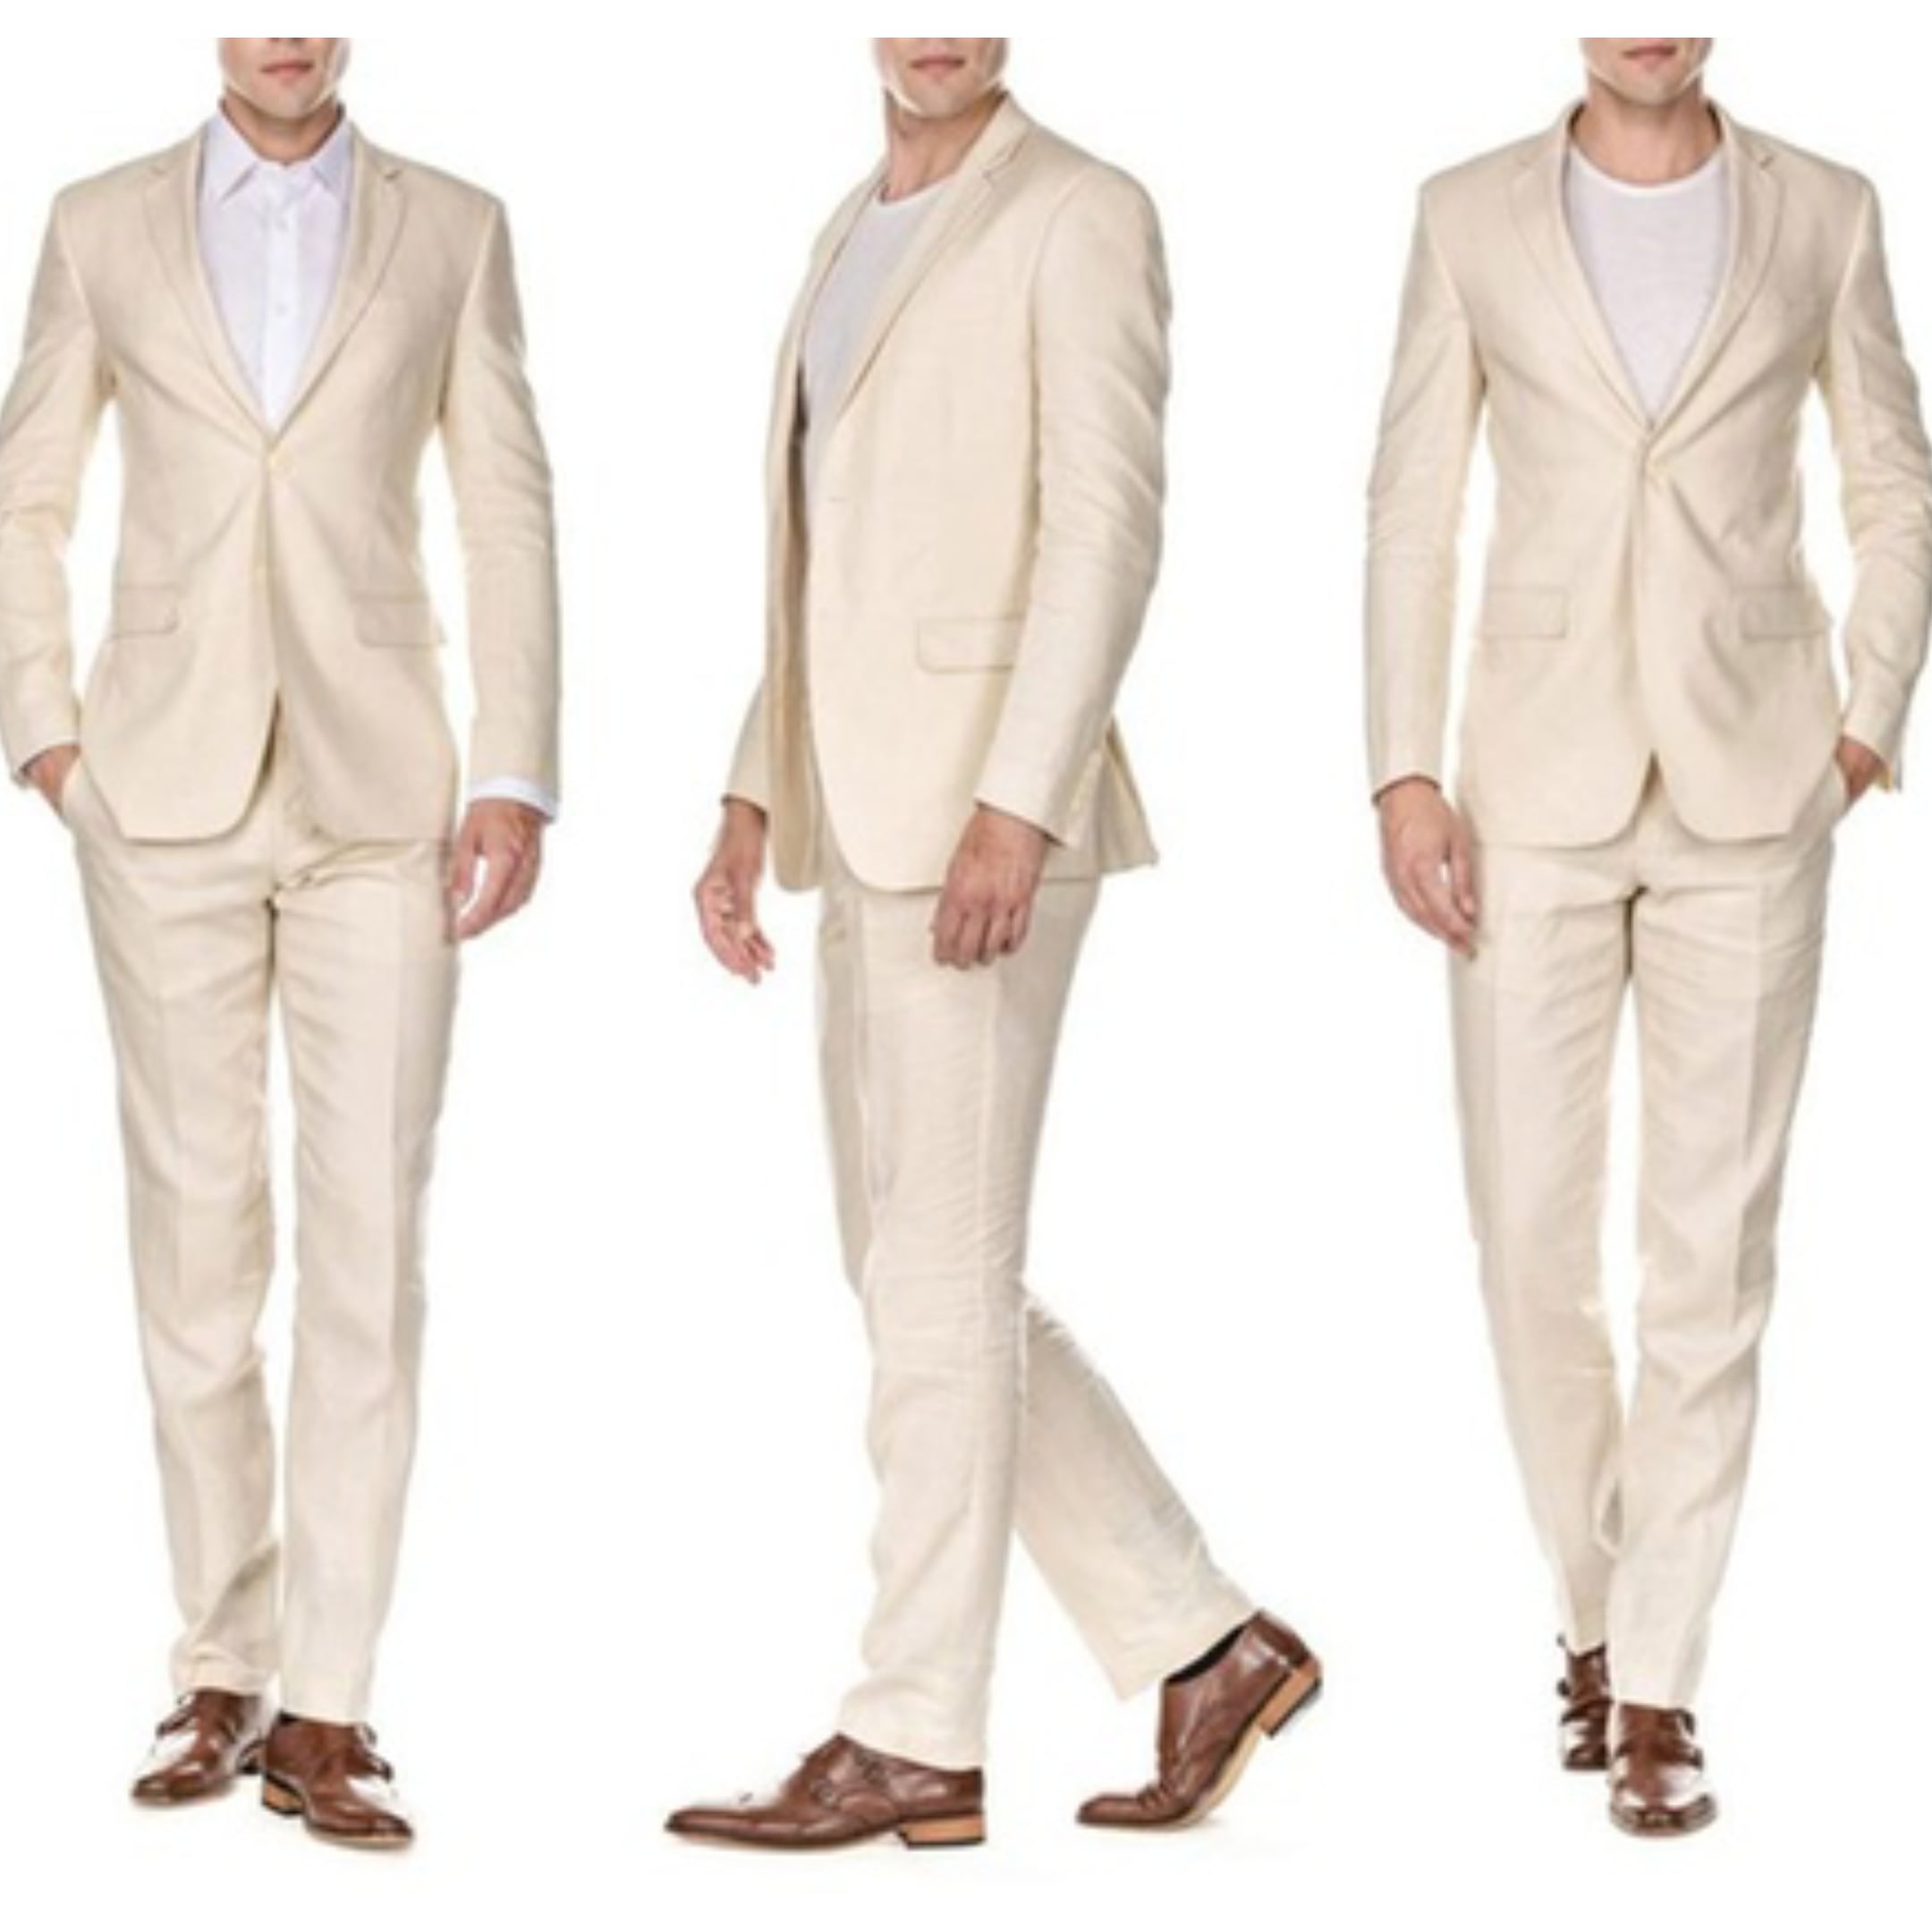 Gold Slim Fit Wedding Suit For Men Custom Made Formal Prom Modern Wedding  Tuxedos Groom With Jacket, Pants, Vest, And Tie From Angelao, $94.4 |  DHgate.Com